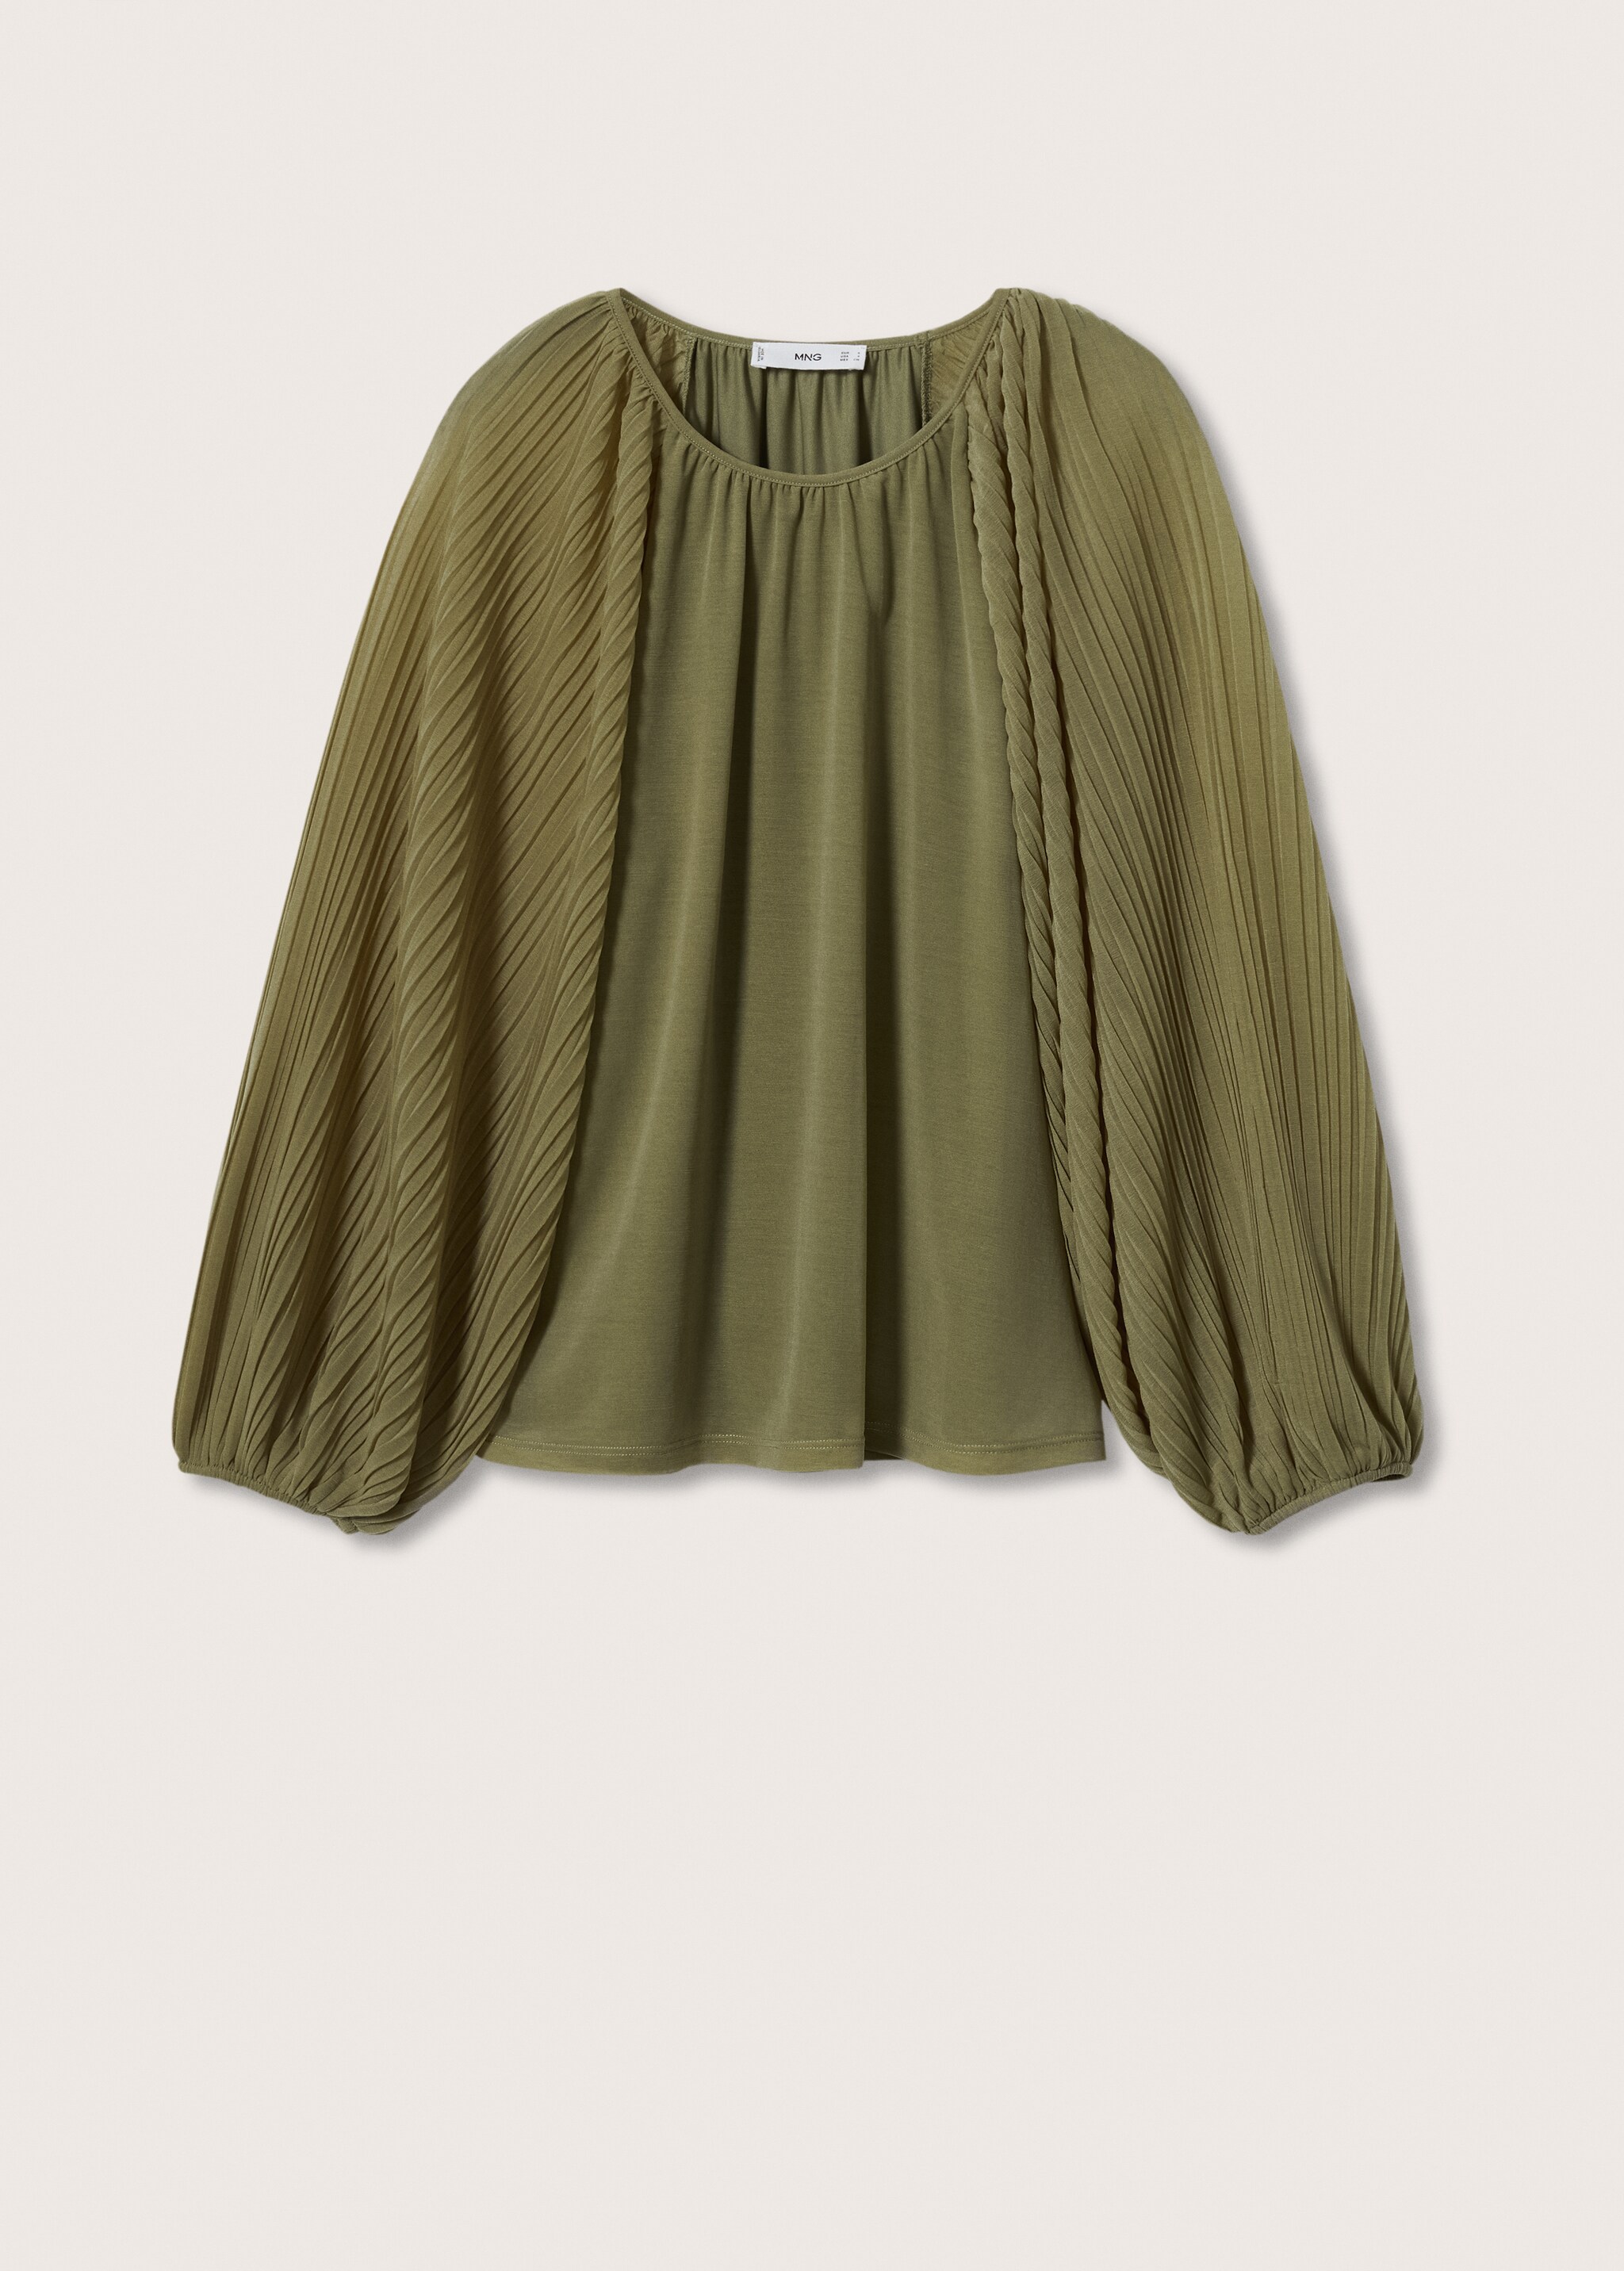 Pleated blouse - Article without model